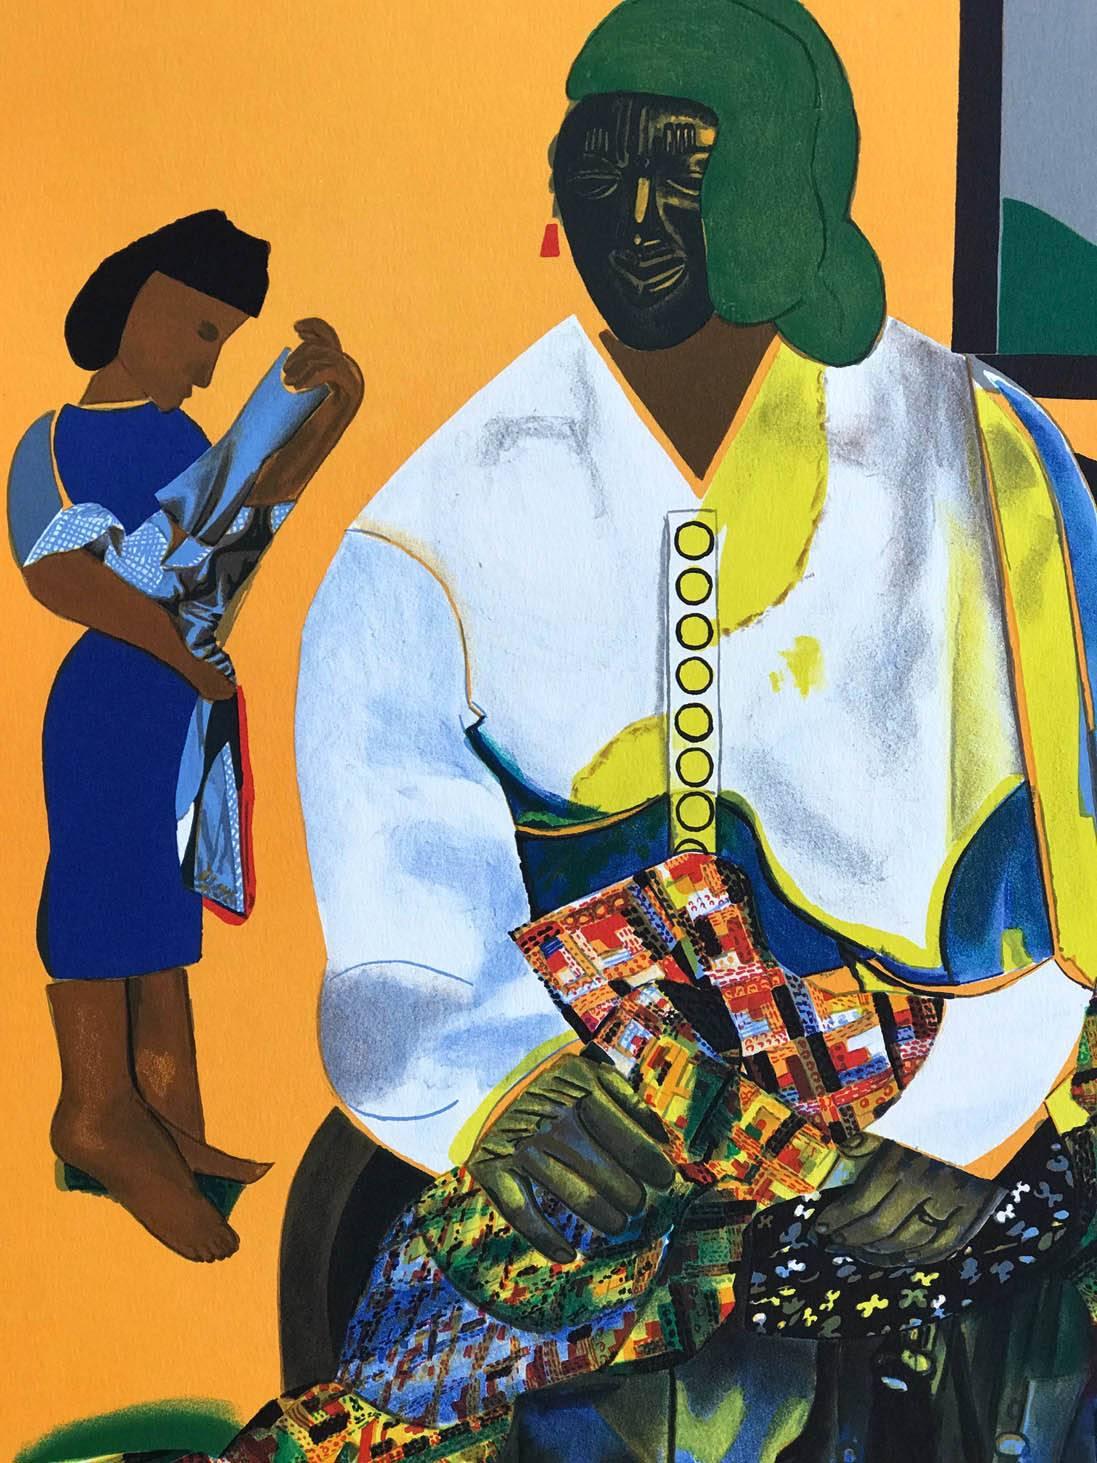 Limited edition color lithograph printed using traditional hand lithography methods on archival Arches printmaking paper, 100% acid free, in an edition size of 175 by the renowned African American artist Romare Bearden. Almost florescent yellow